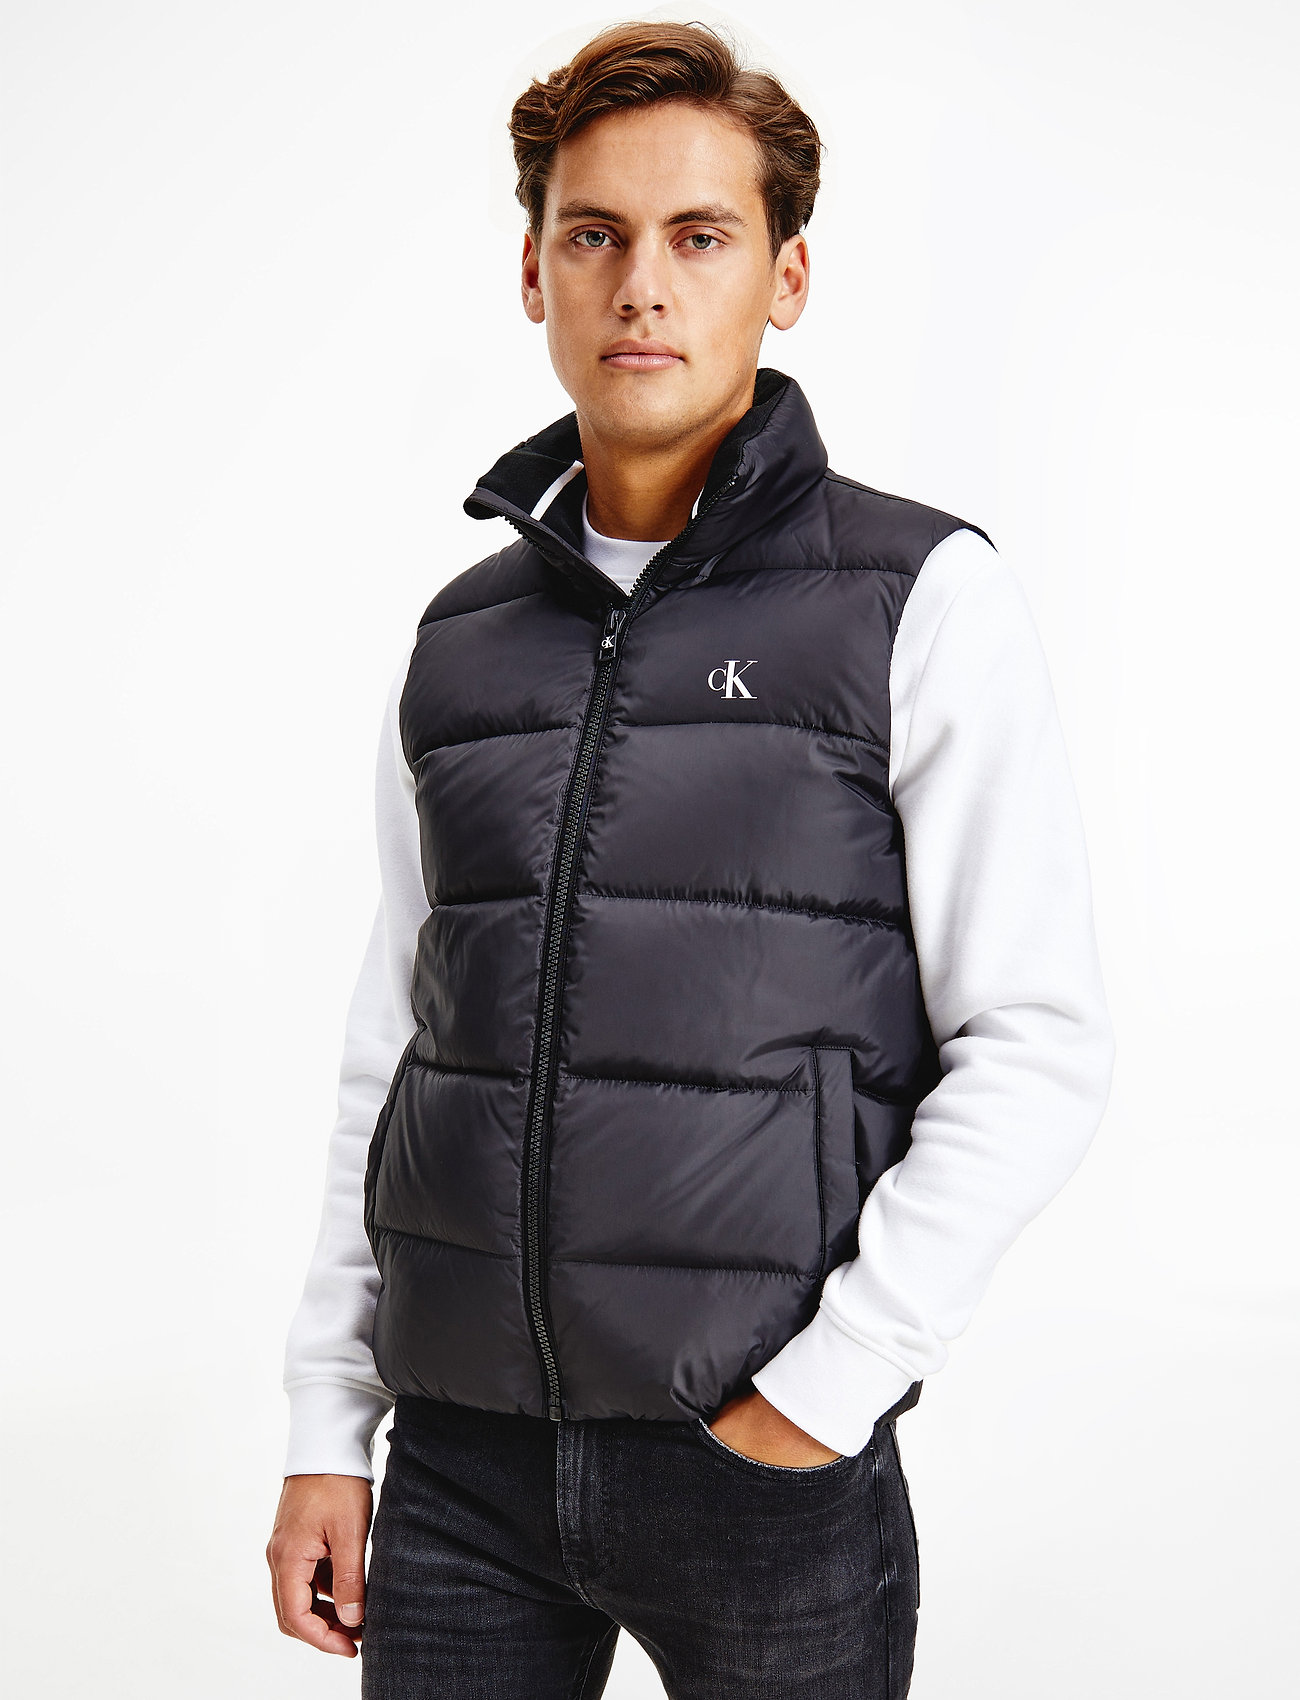 Calvin Klein Jeans Ess Down Vest - 199.90 €. Buy Vests from Calvin Klein  Jeans online at Boozt.com. Fast delivery and easy returns